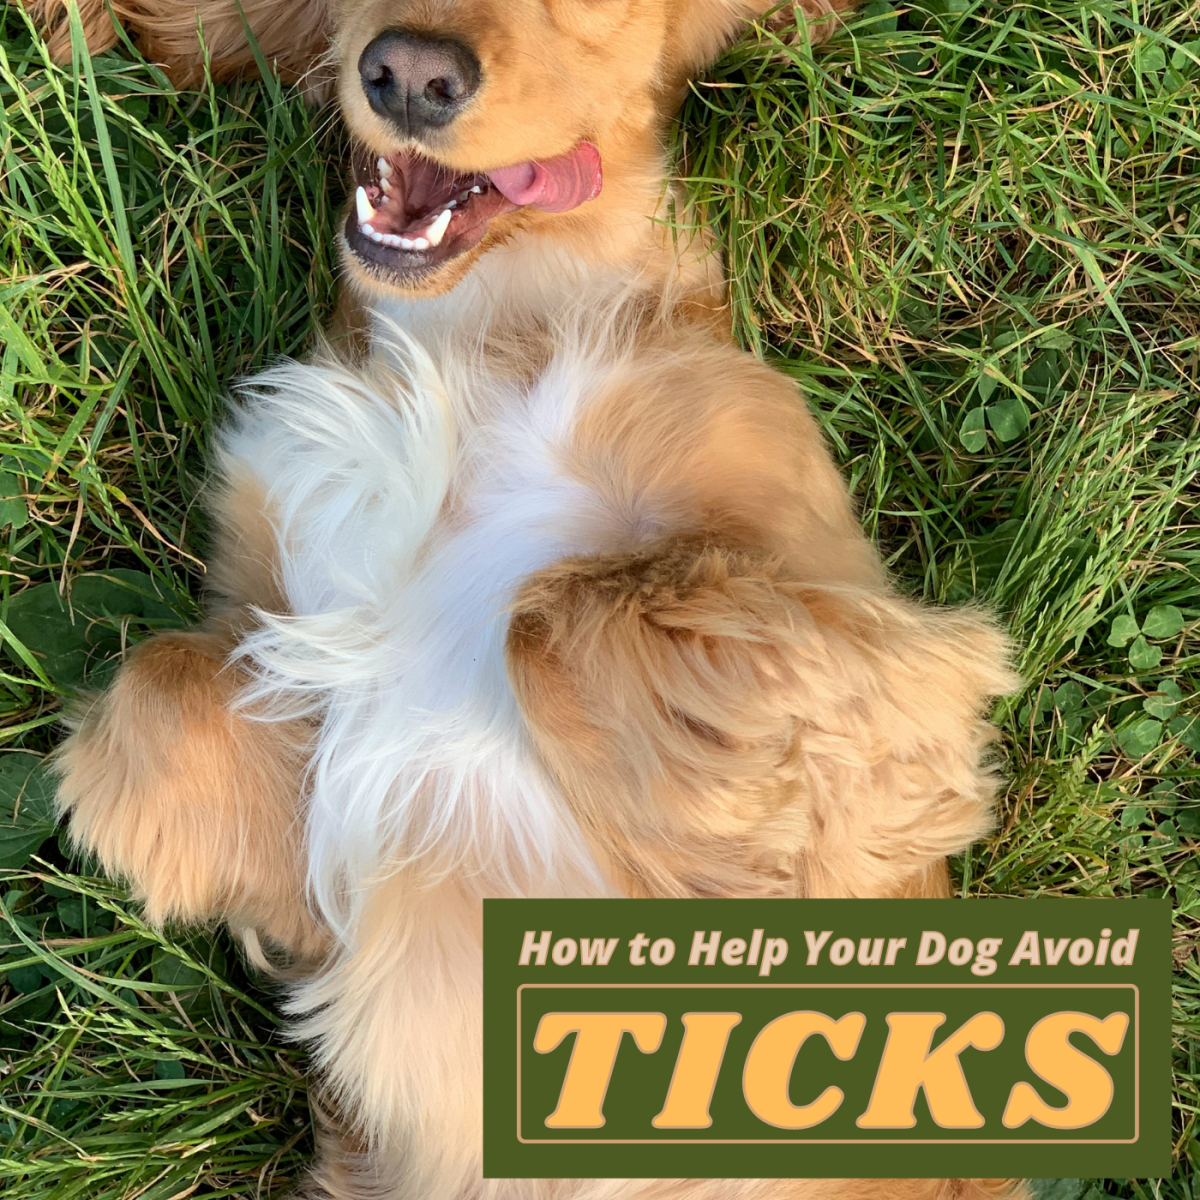 Tick Precautions and Safety Tips for Dog Owners and Their Pets